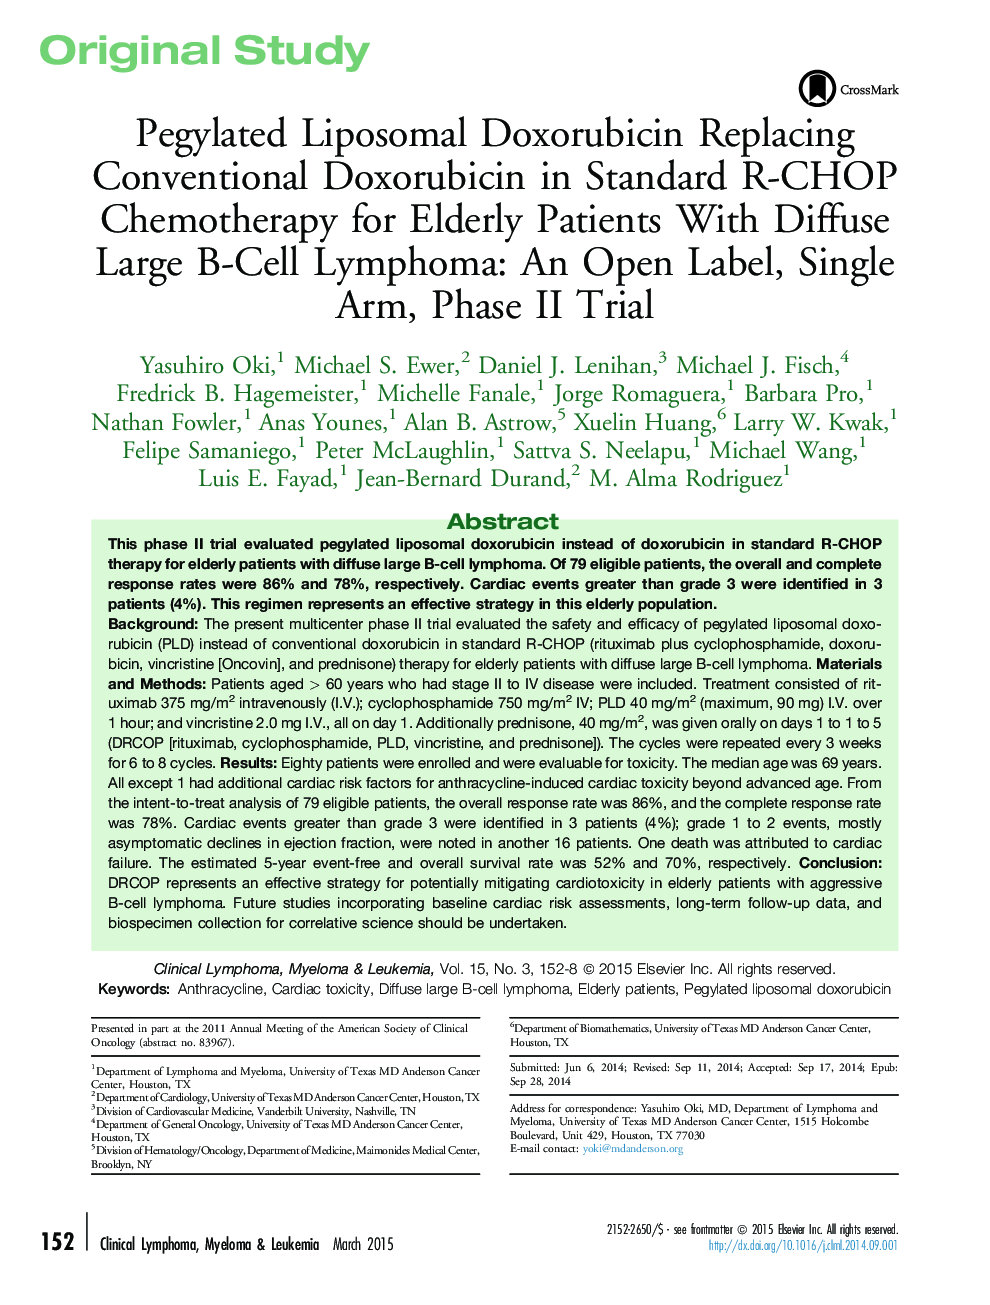 Pegylated Liposomal Doxorubicin Replacing Conventional Doxorubicin in Standard R-CHOP Chemotherapy for Elderly Patients With Diffuse Large B-Cell Lymphoma: An Open Label, Single Arm, Phase II Trial